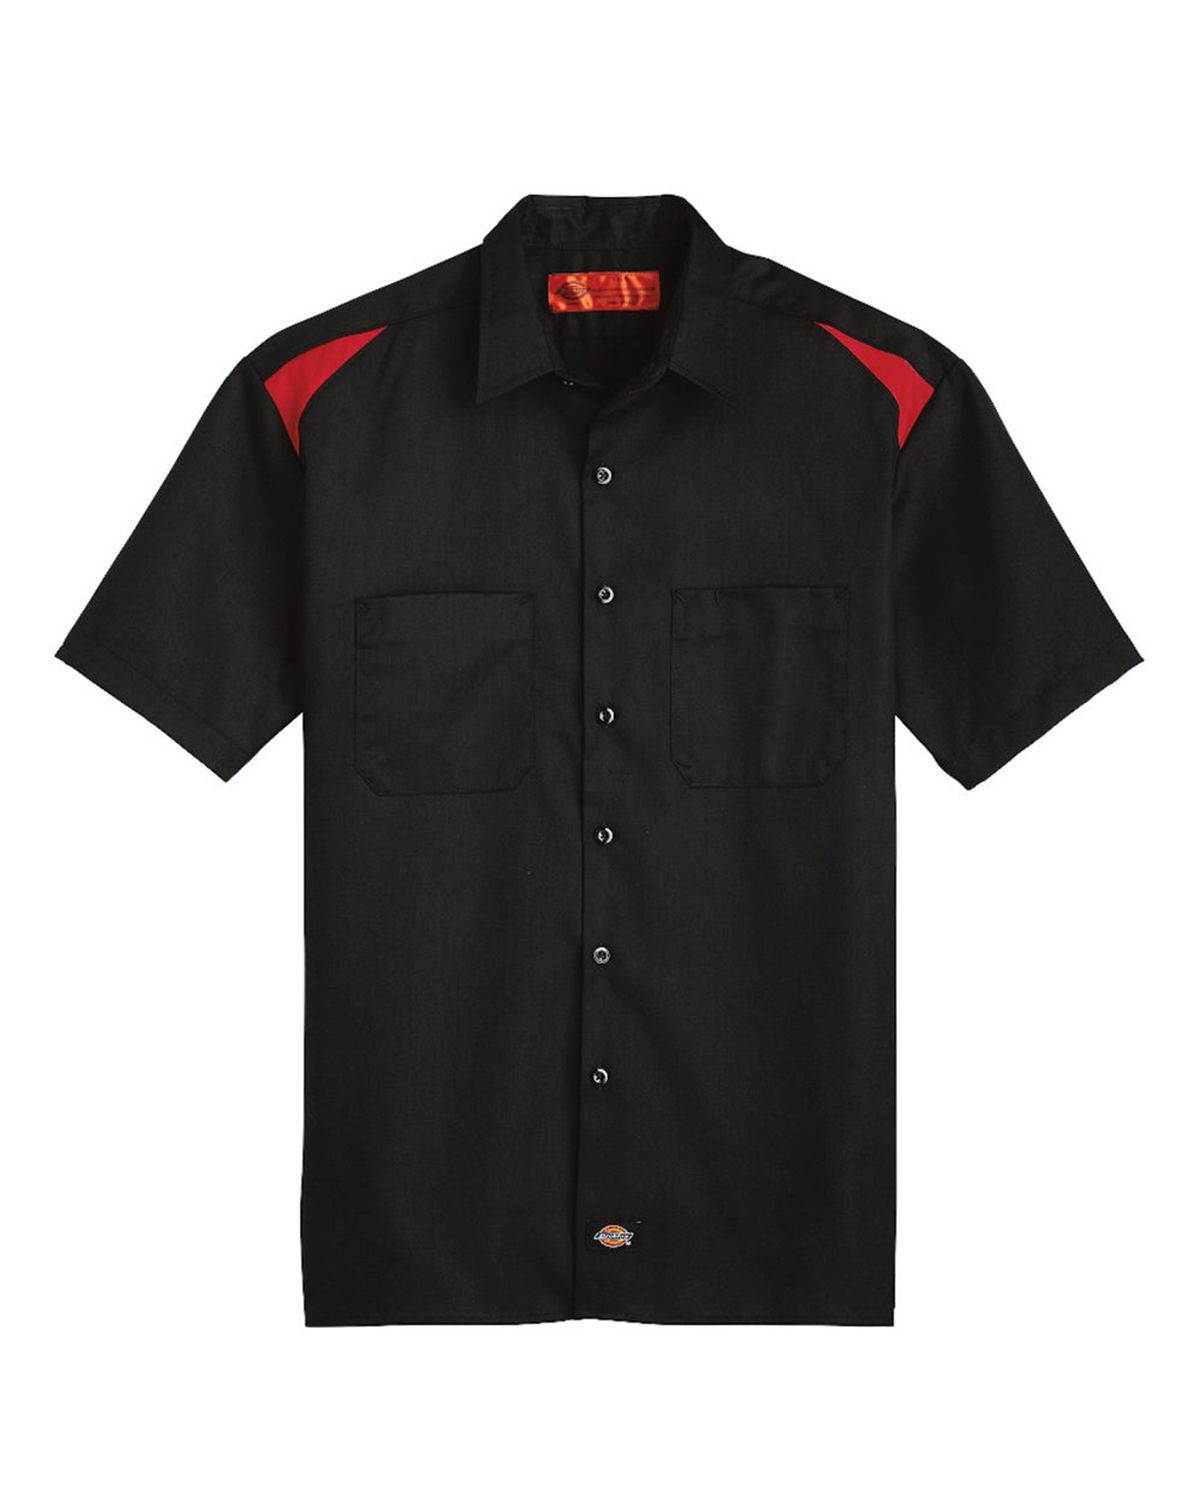 Dickies 05 Short Sleeve Performance Team Shirt - Free Shipping Available